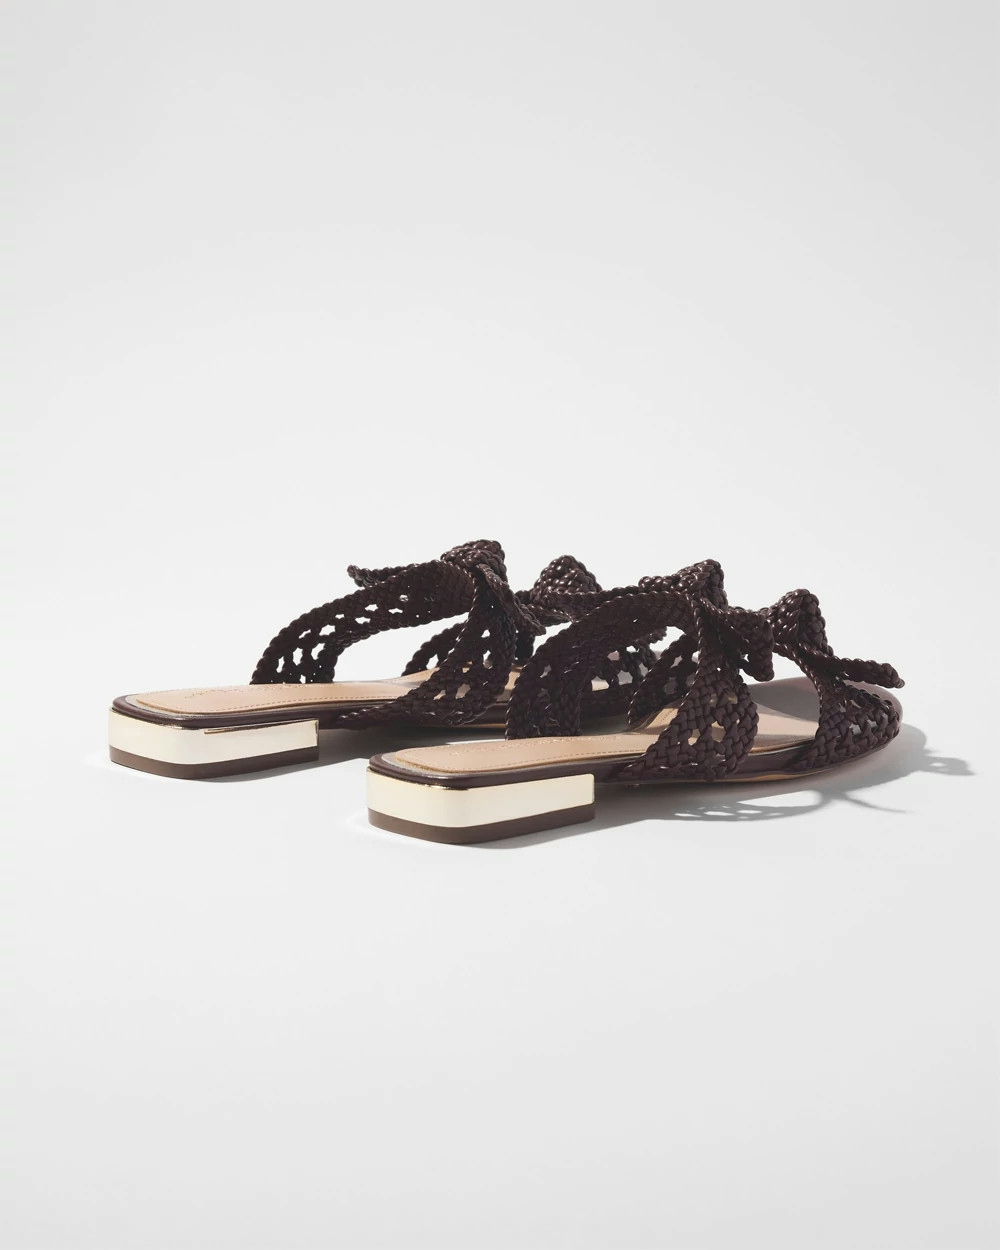 Shop White House Black Market Braided Sandals In Rocky Cliff